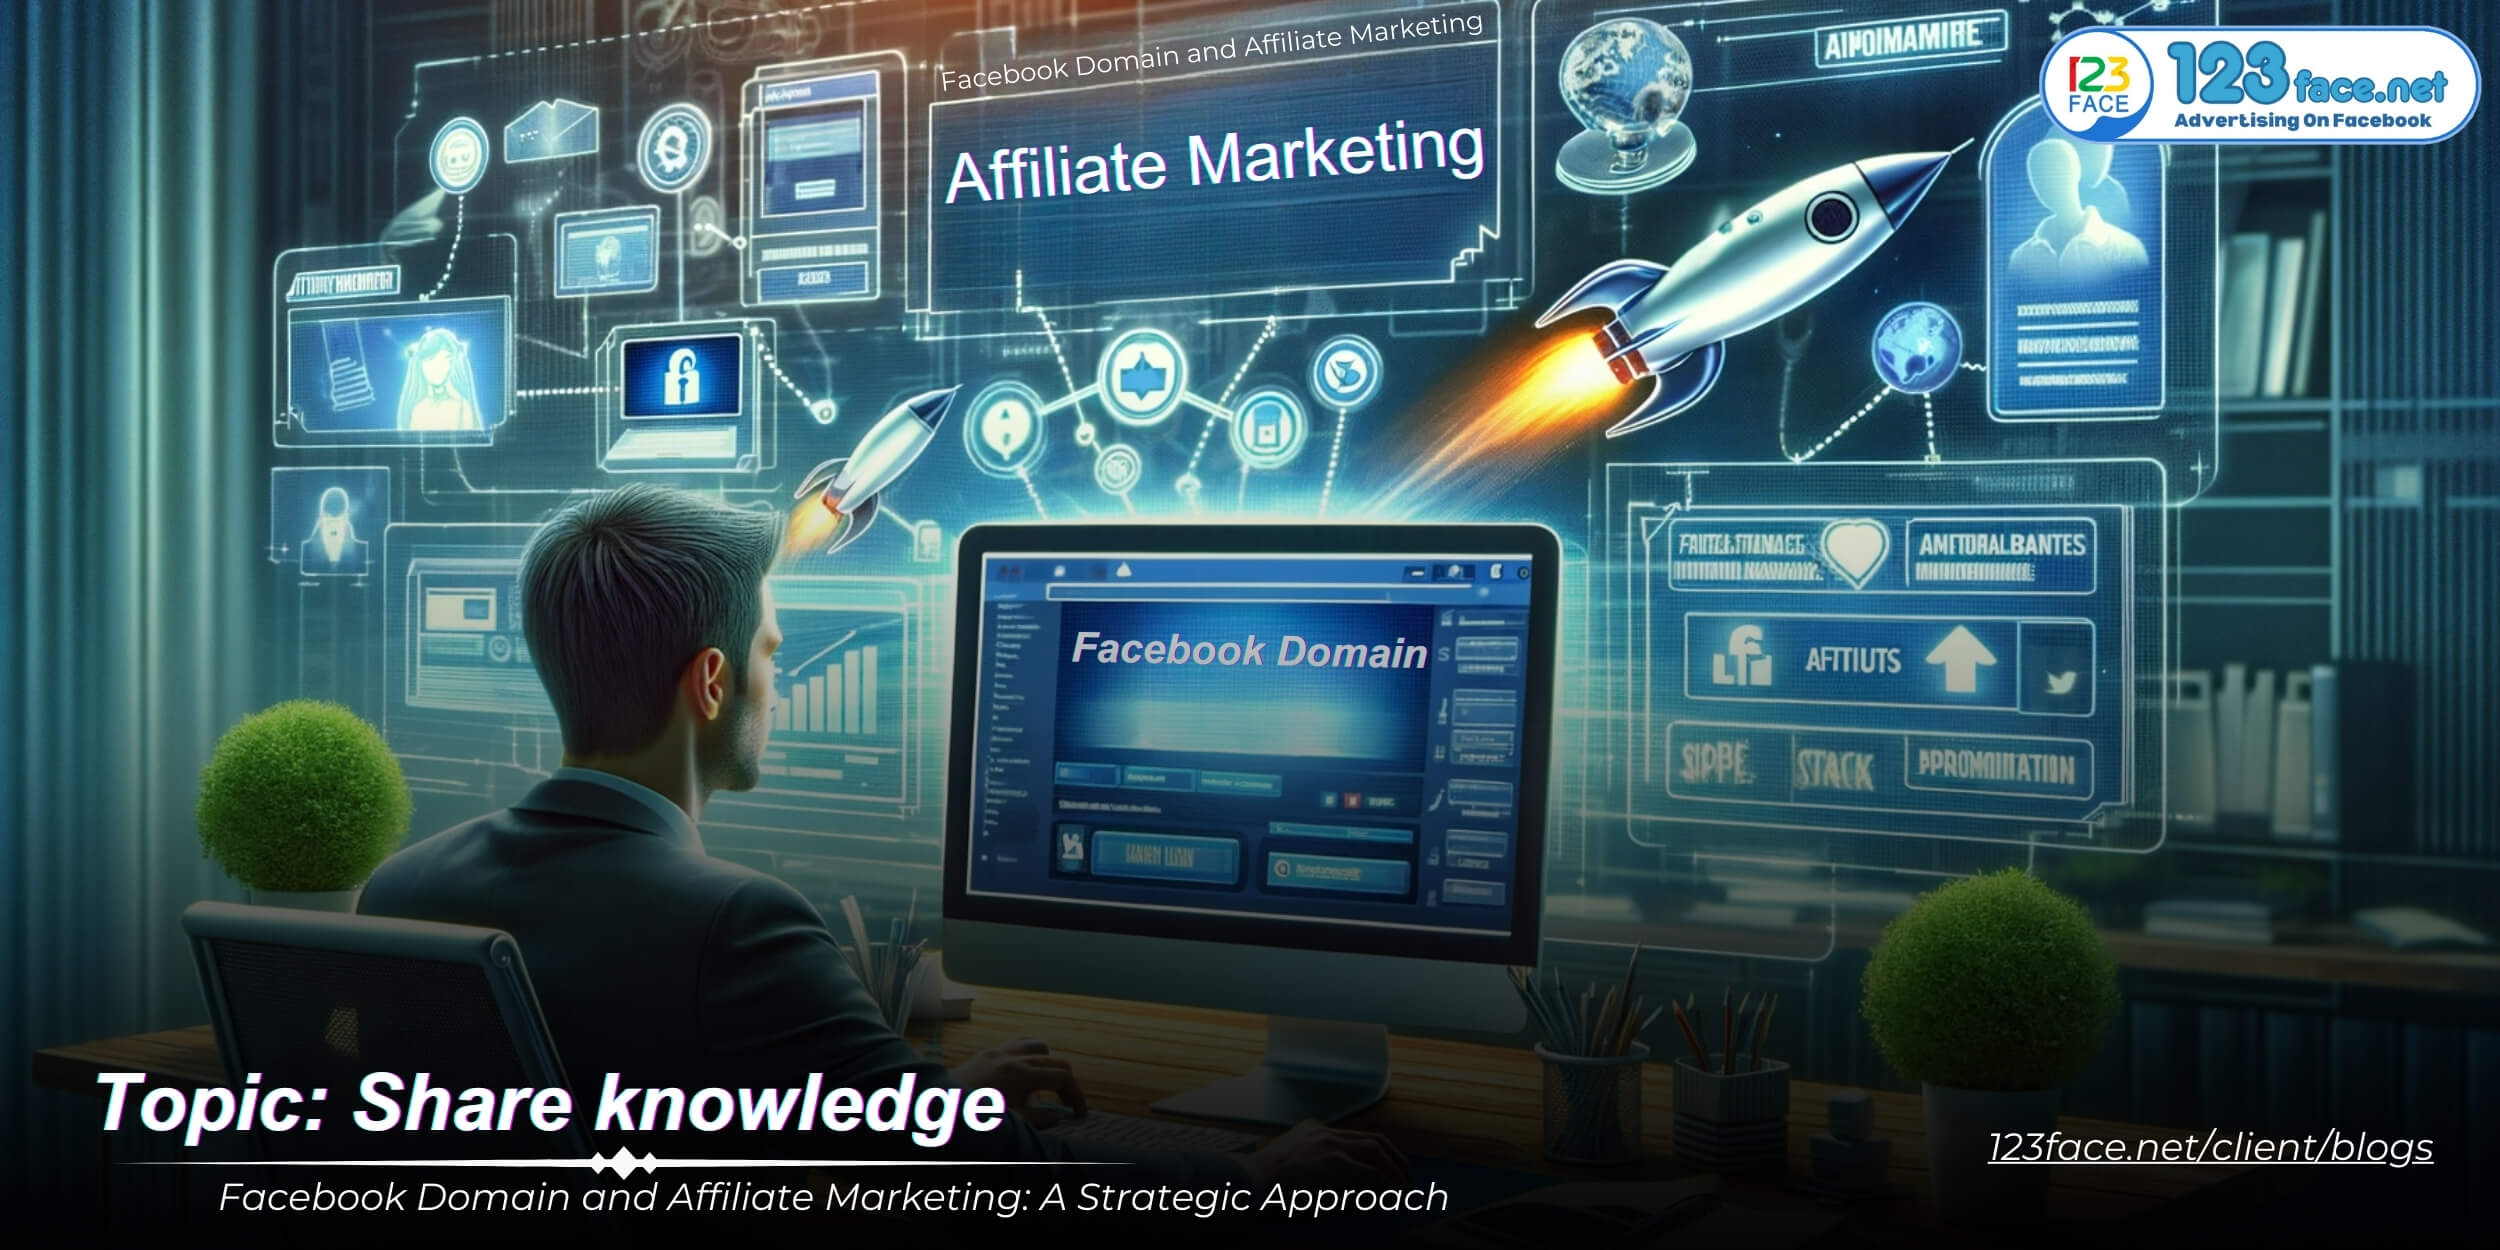 Facebook Domain and Affiliate Marketing: A Strategic Approach